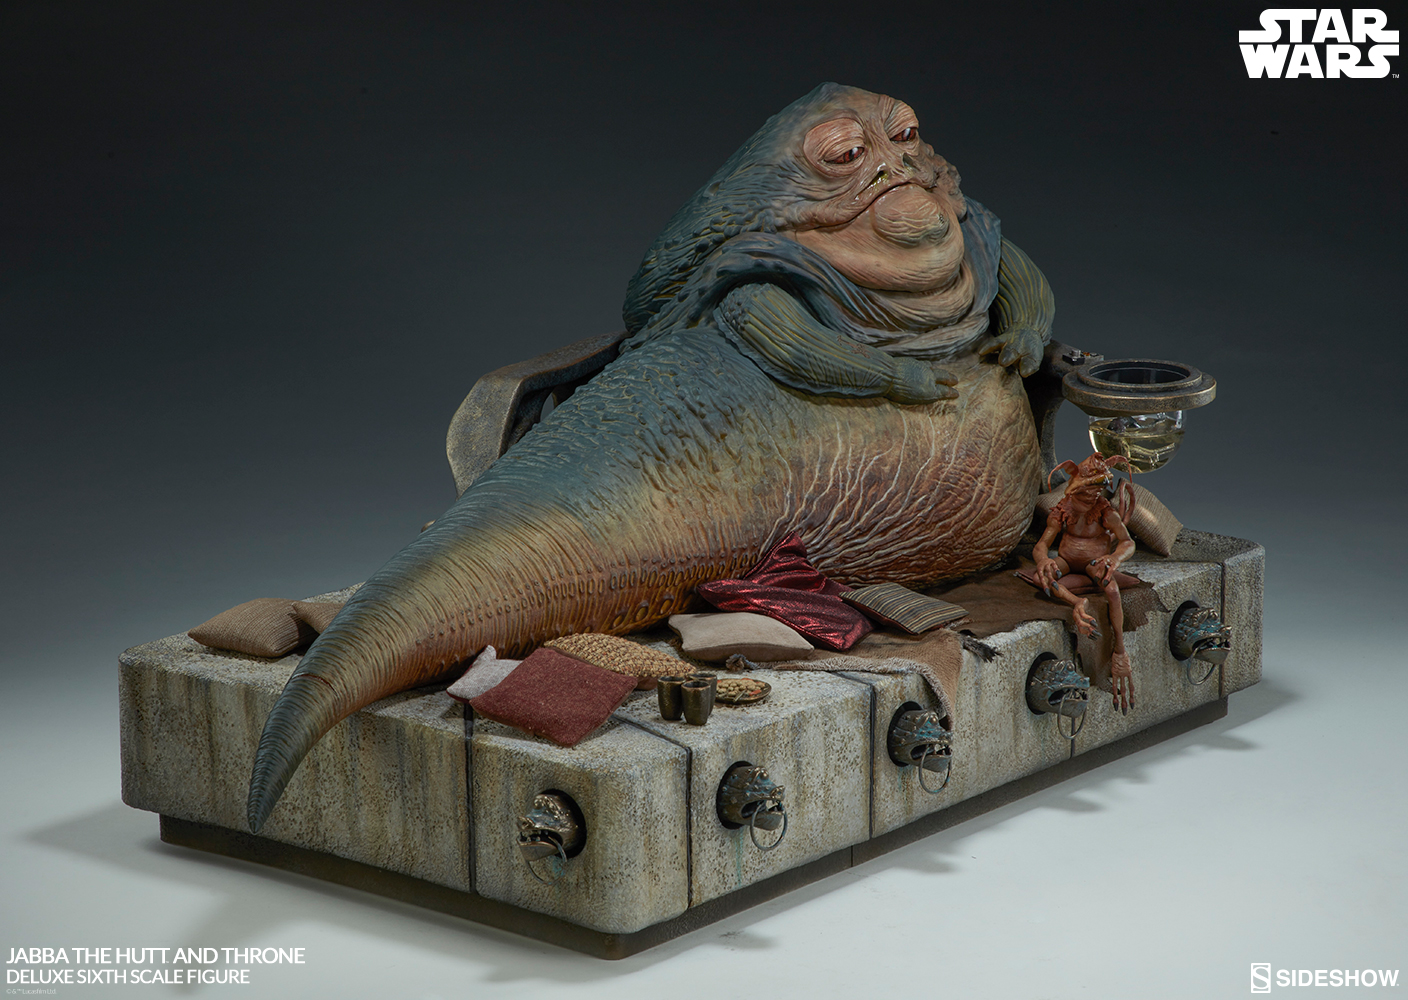 star-wars-jabba-the-hutt-and-throne-deluxe-sixth-scale-figure-sideshow-100410-16